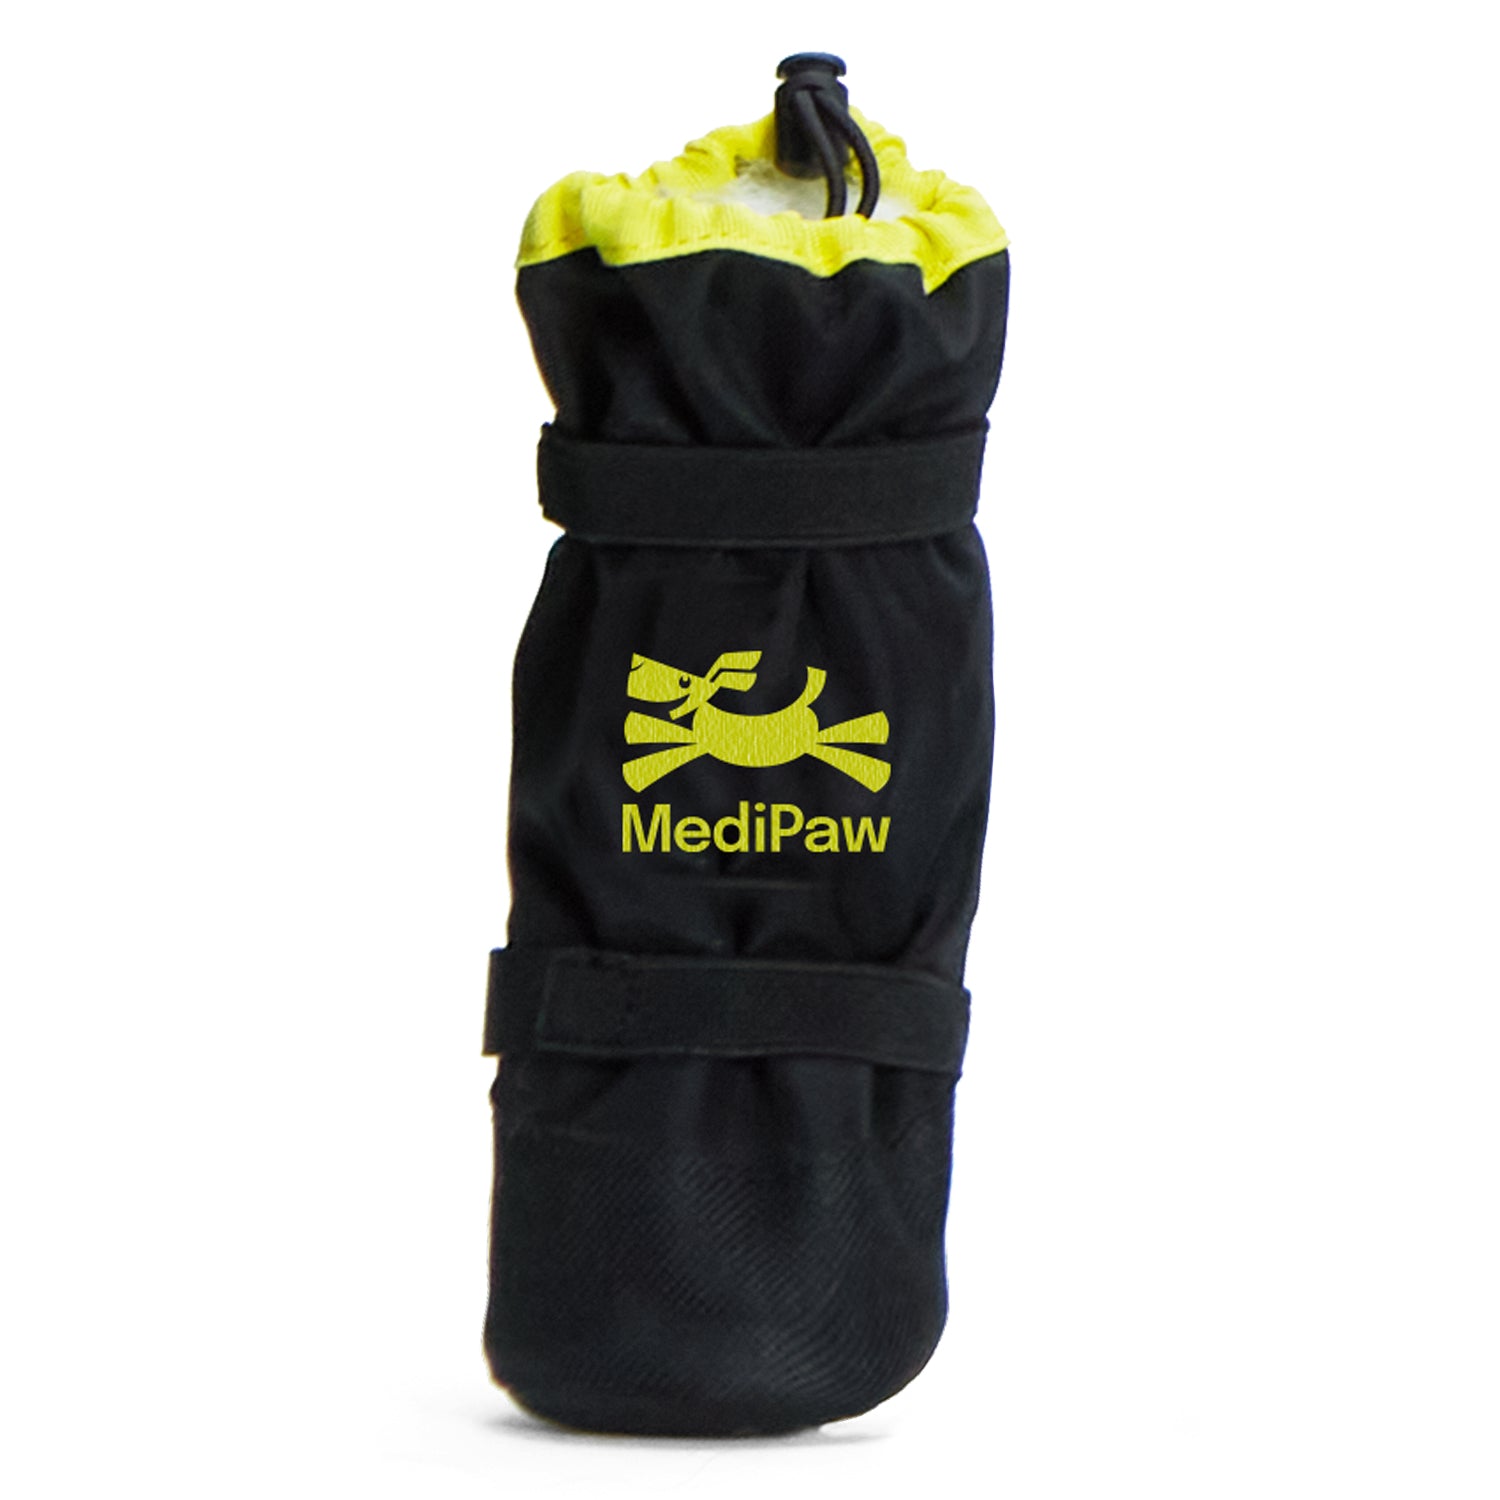 A black and yellow bag with the word madpaw on it, perfect for carrying Your Whole Dog's MediPaw: Soft Bandage (Basic) Boots or other items.